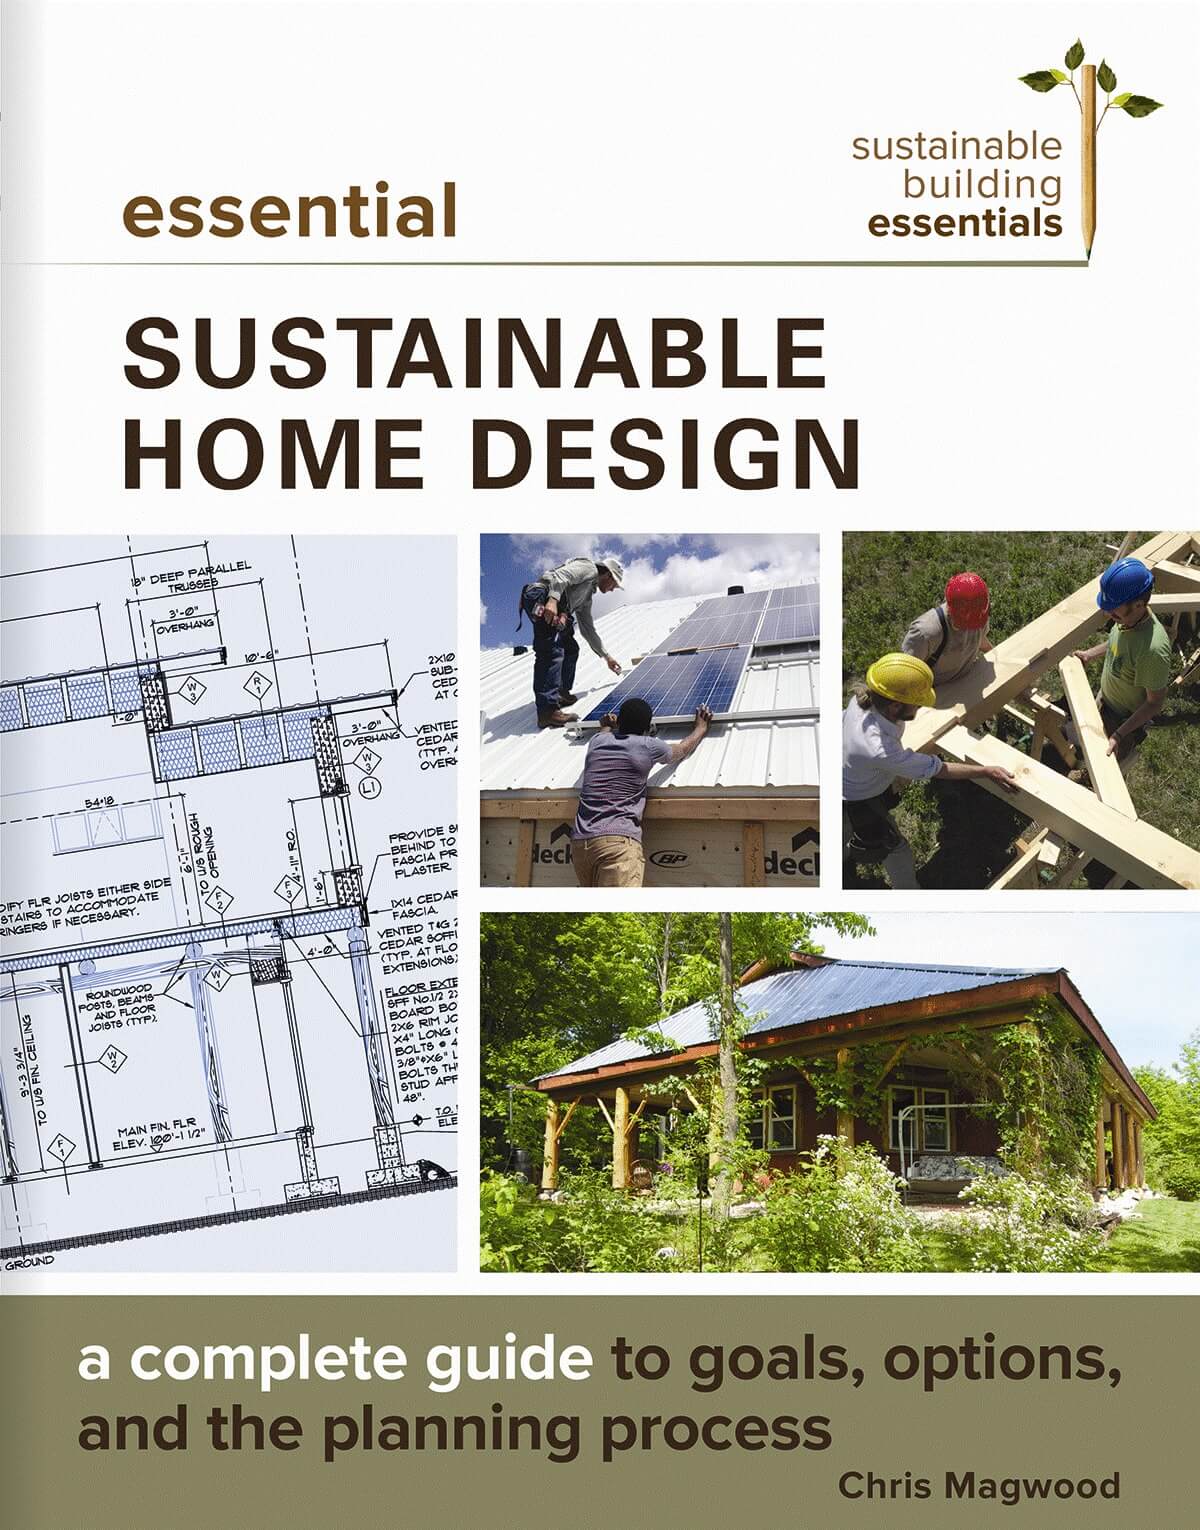 Book cover for "Essential Sustainable Home Design."